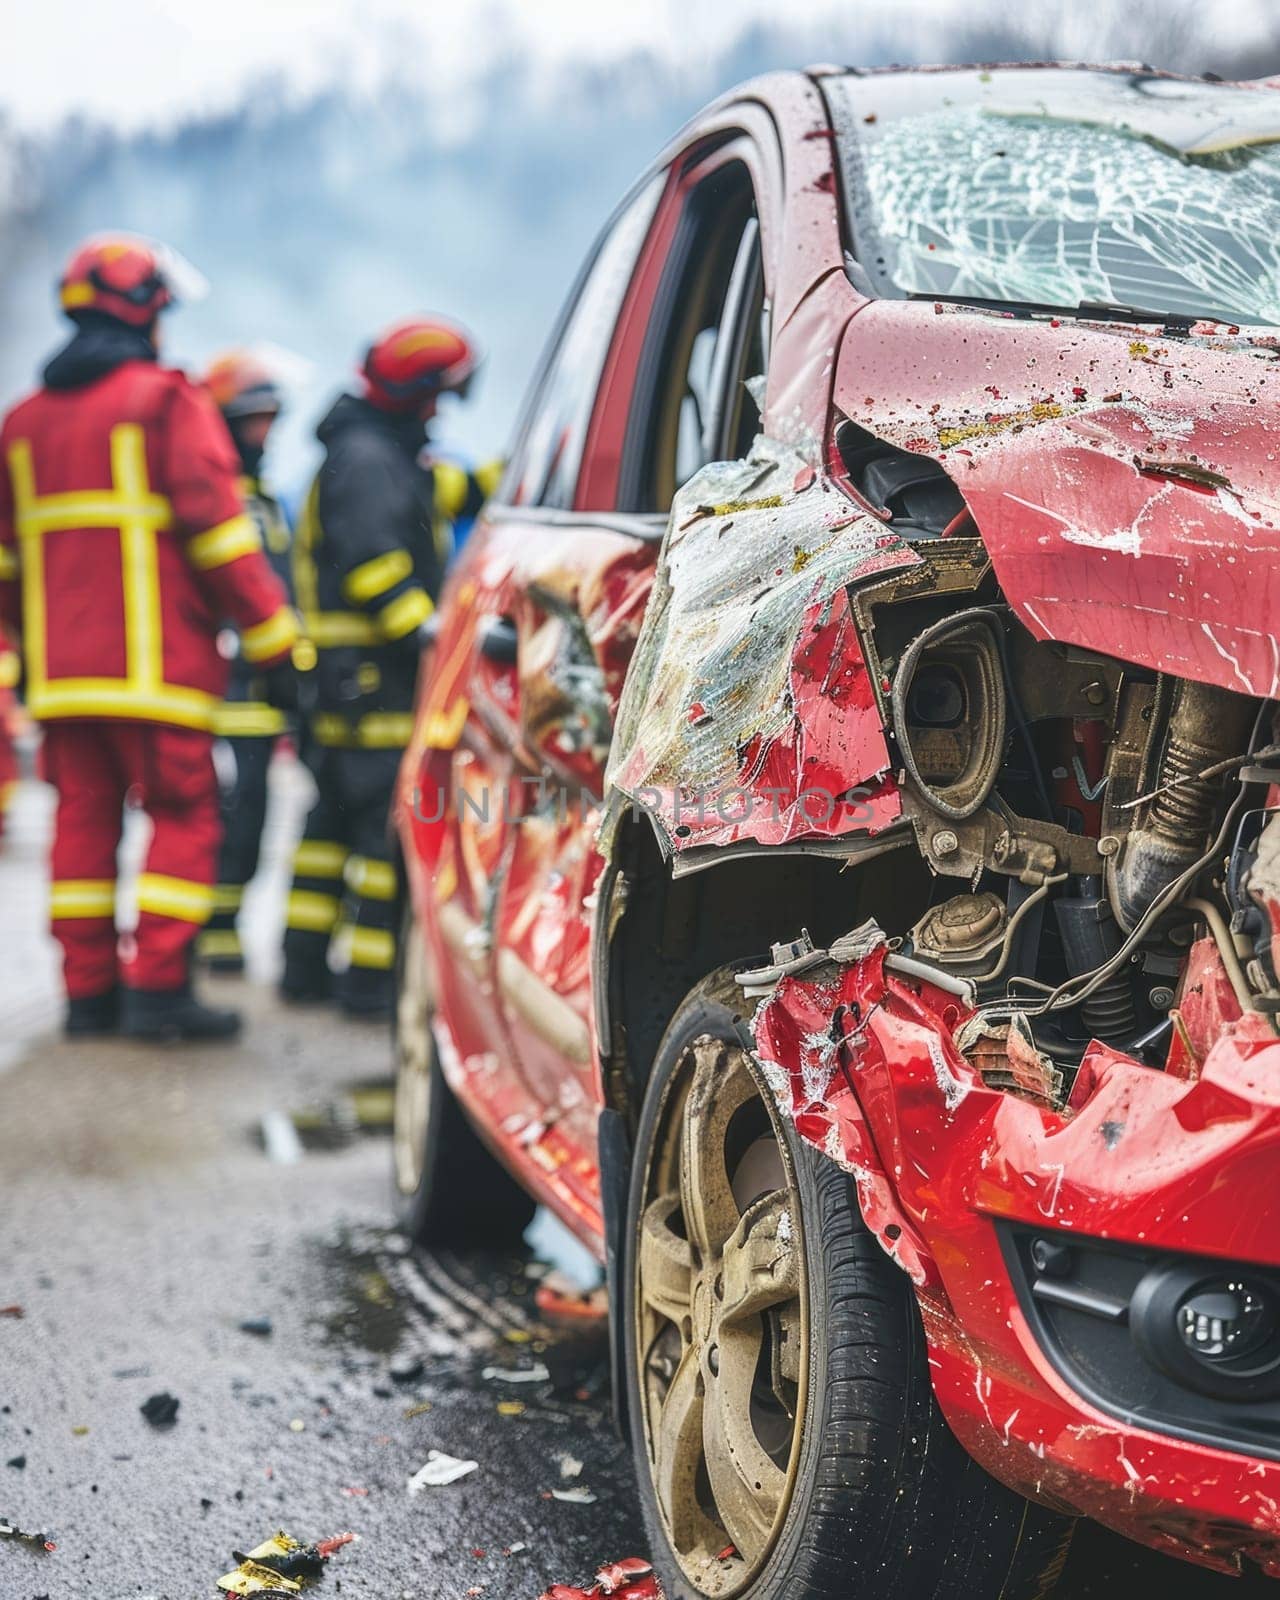 The image depicts the aftermath of a severe car accident, with a heavily damaged vehicle surrounded by emergency responders in protective gear